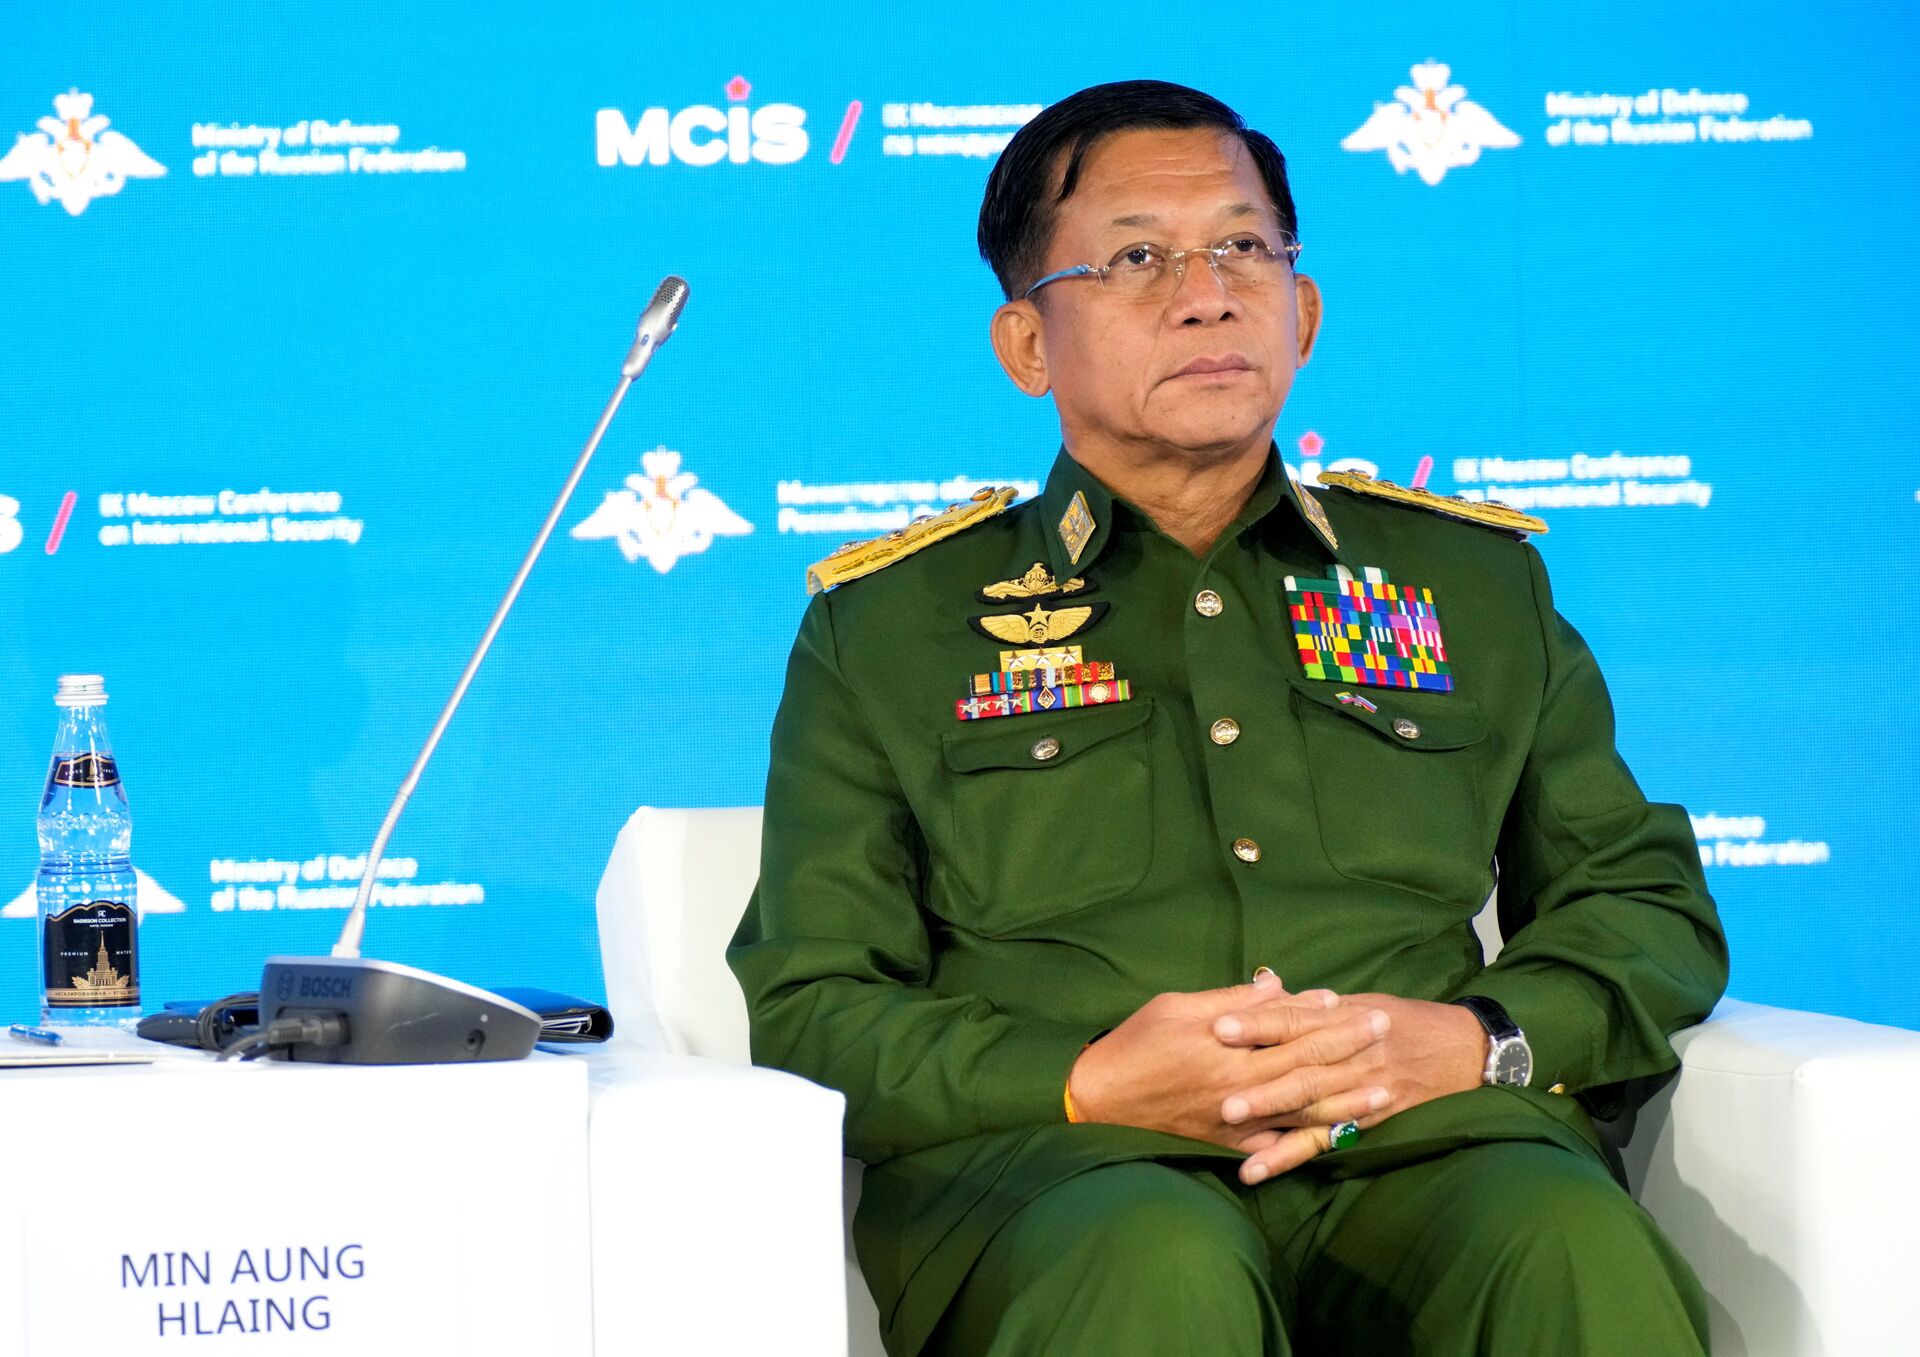 Myanmar Plans to Expand Military Cooperation With Russia, Commander-in-Chief Says - Sputnik International, 1920, 28.06.2021